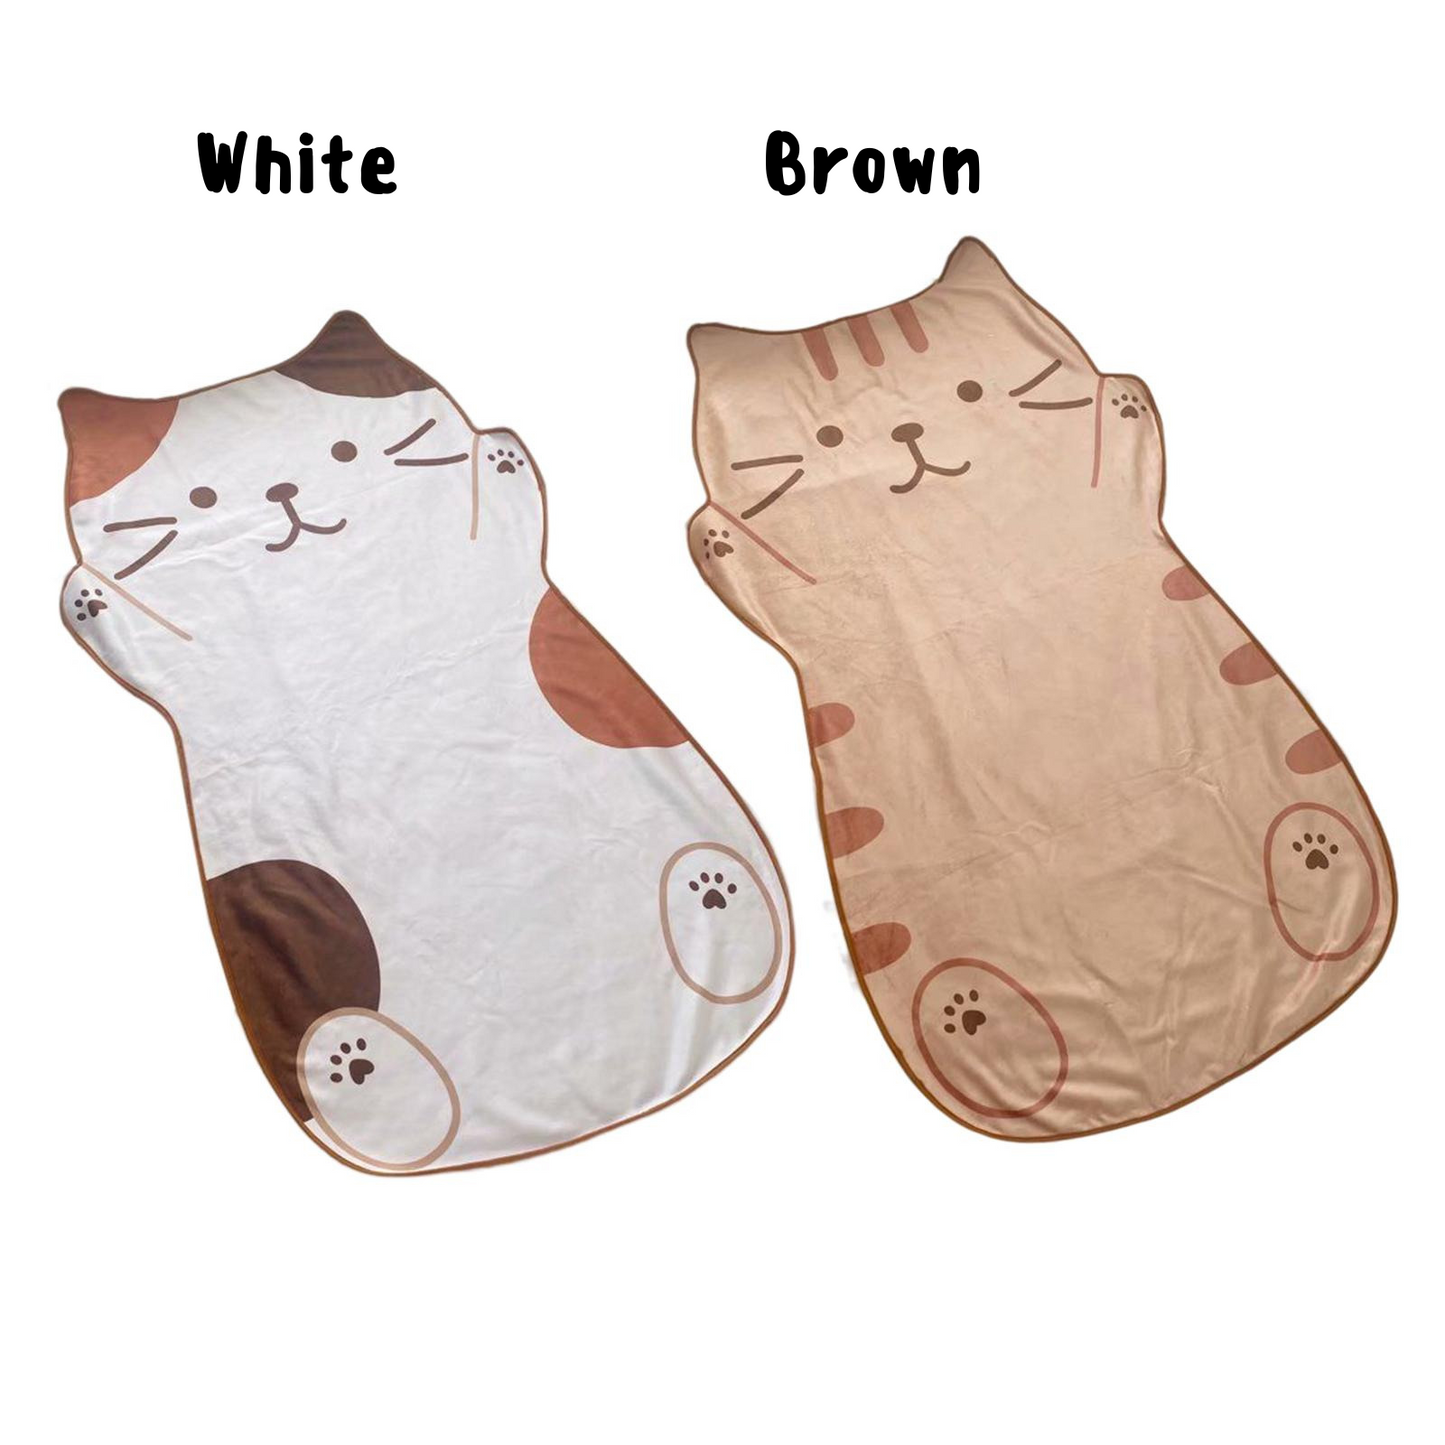 Cute cat shaped blanket - for bedding, sofa, throw and home decor